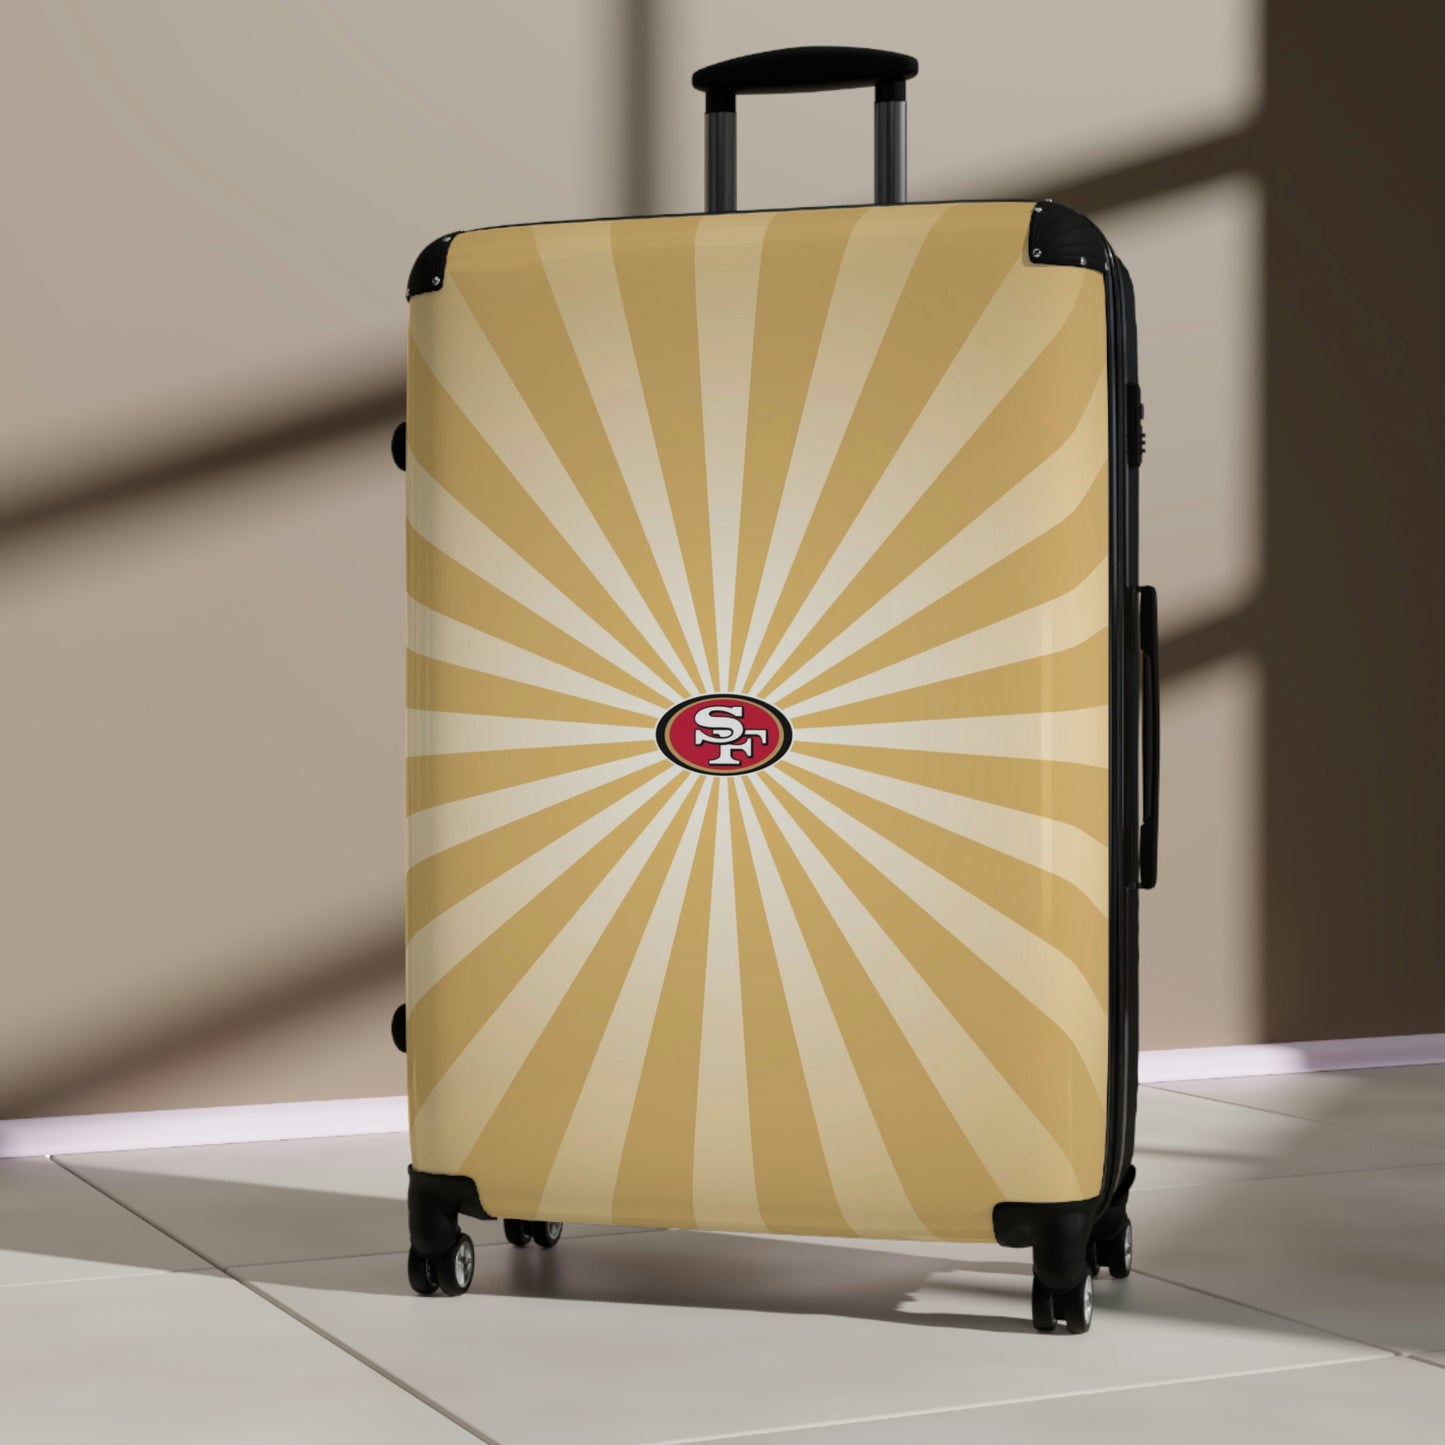 Geotrott San Francisco 49ers National Football League NFL Team Logo Cabin Suitcase Rolling Luggage Checking Bag